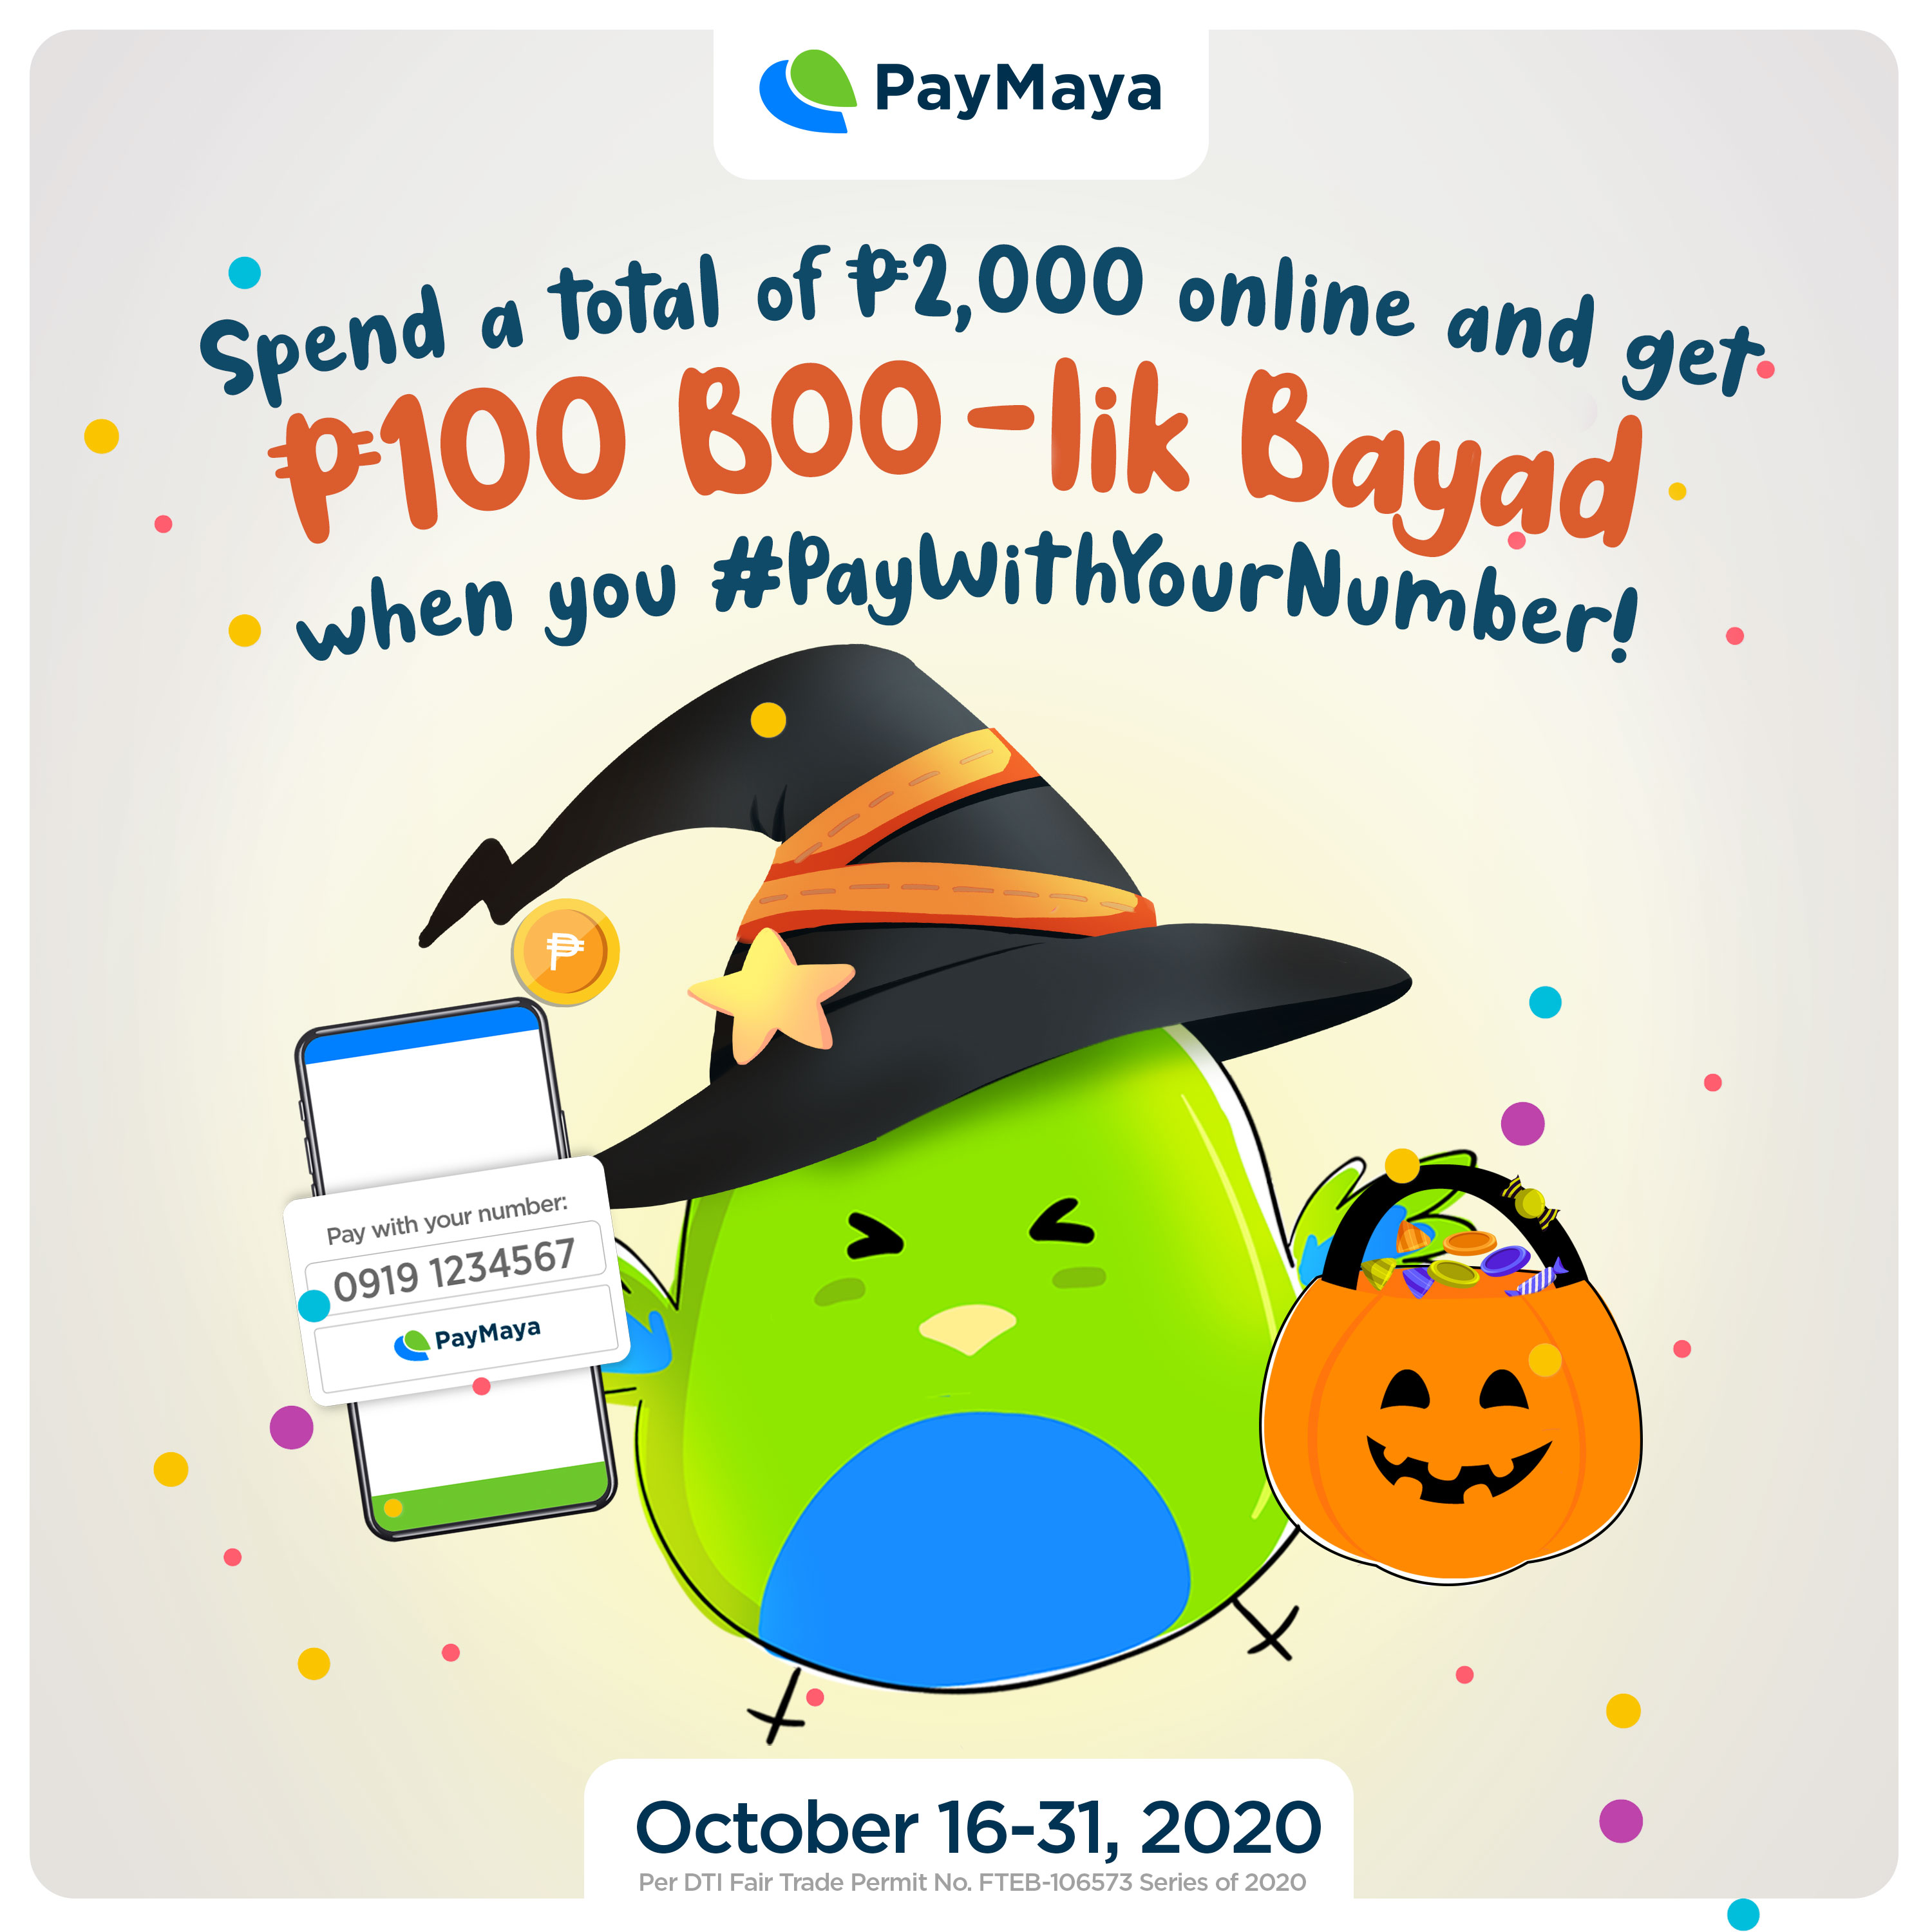 Four ways to safely celebrate Halloween at home with PayMaya